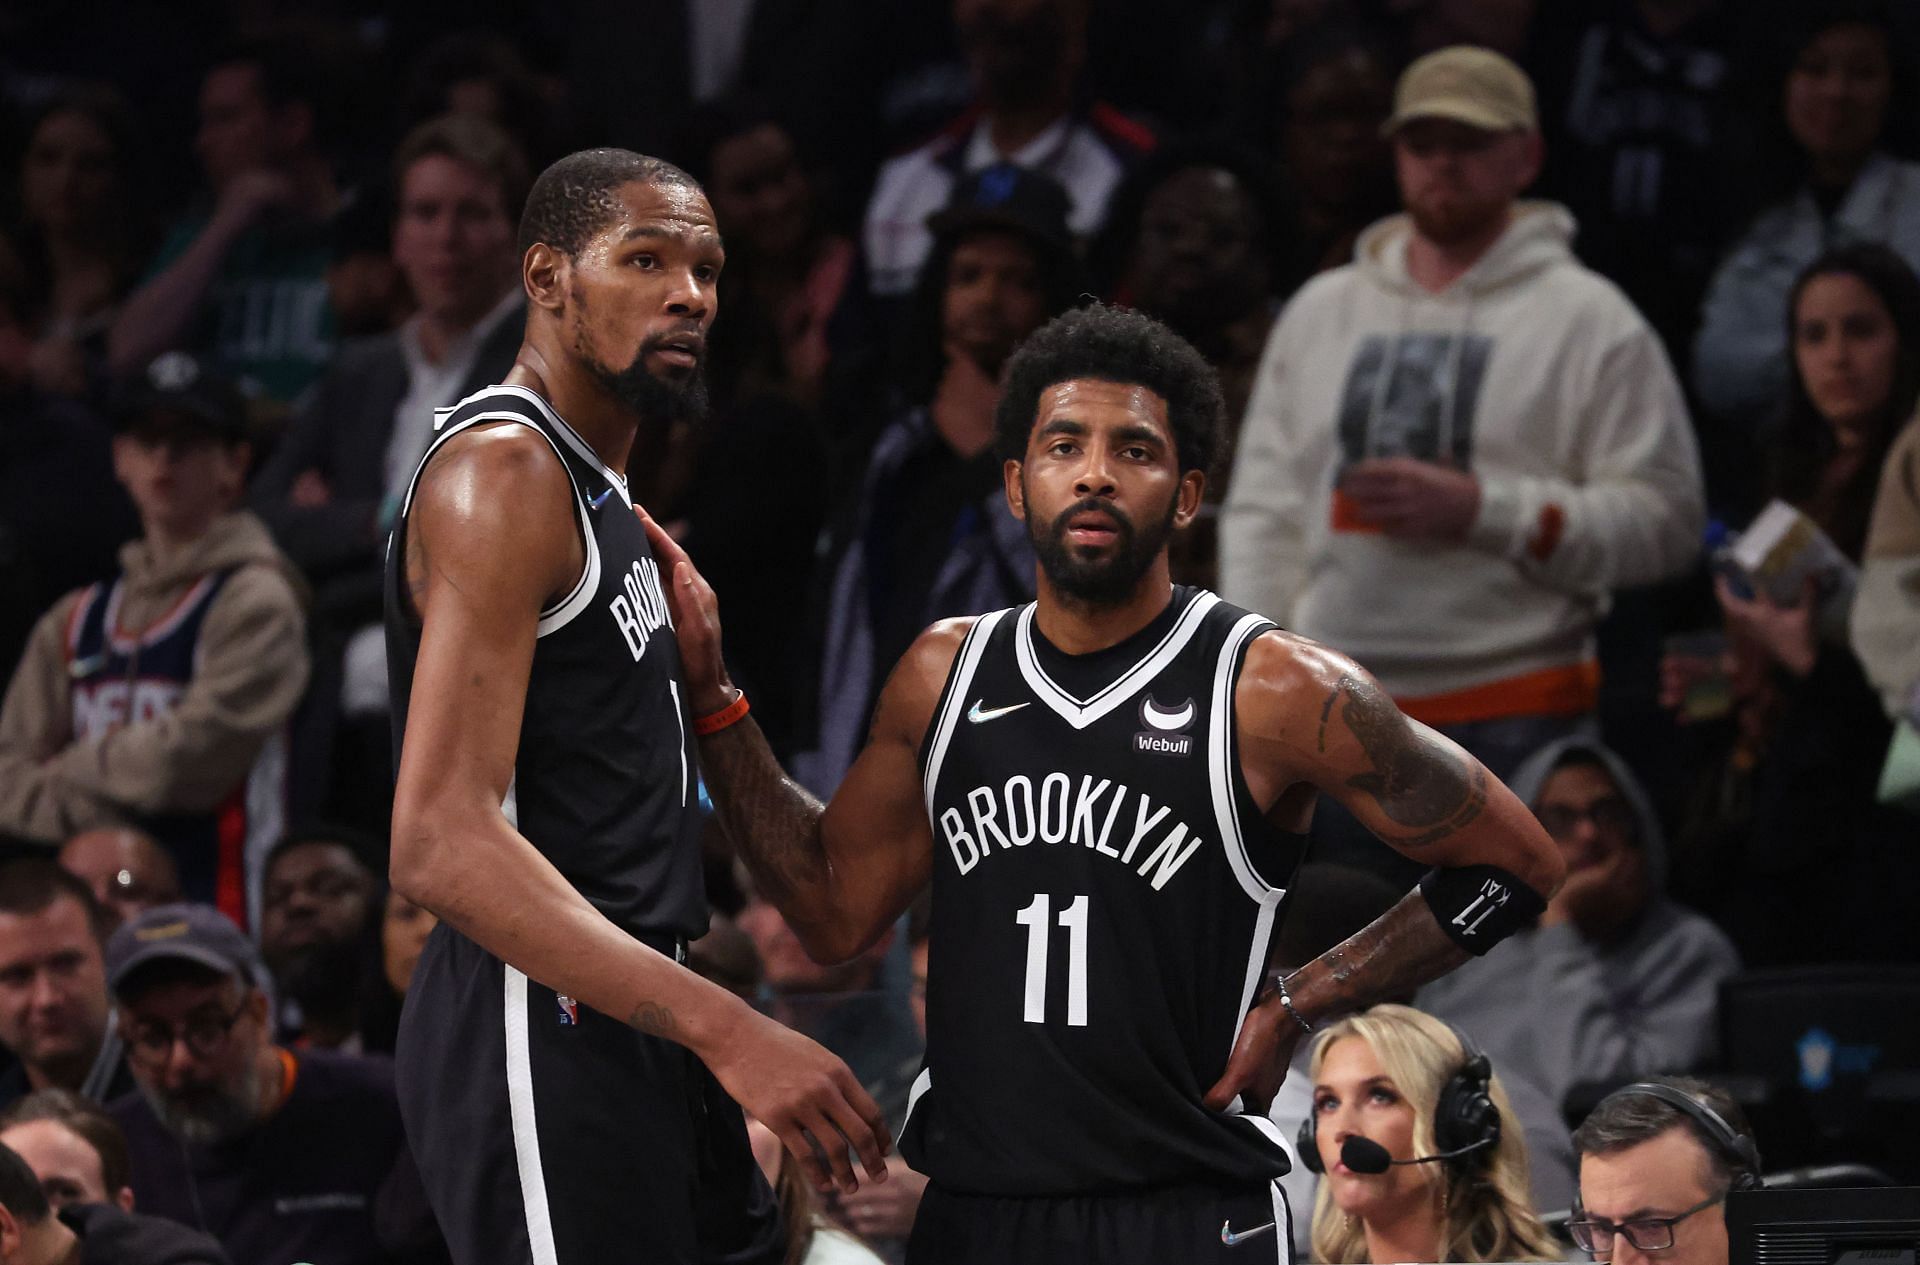 Brooklyn Nets'ten Kevin Durant ve Kyrie Irving